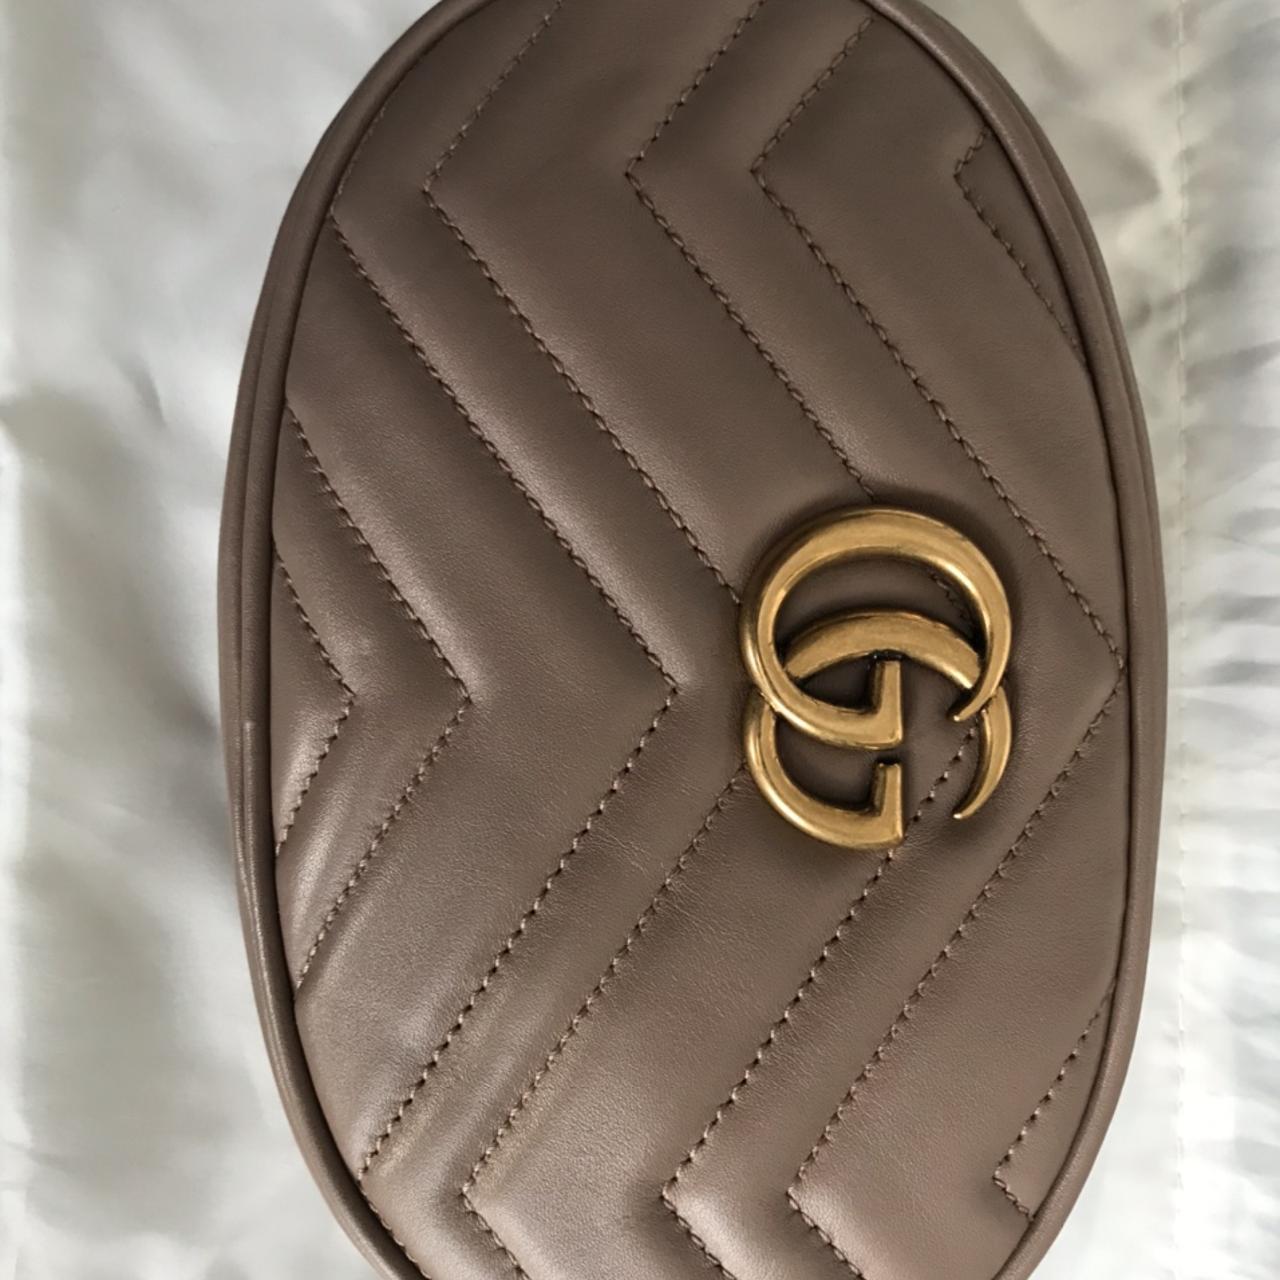 authentic gucci paper bag dark brown and gold gucci - Depop